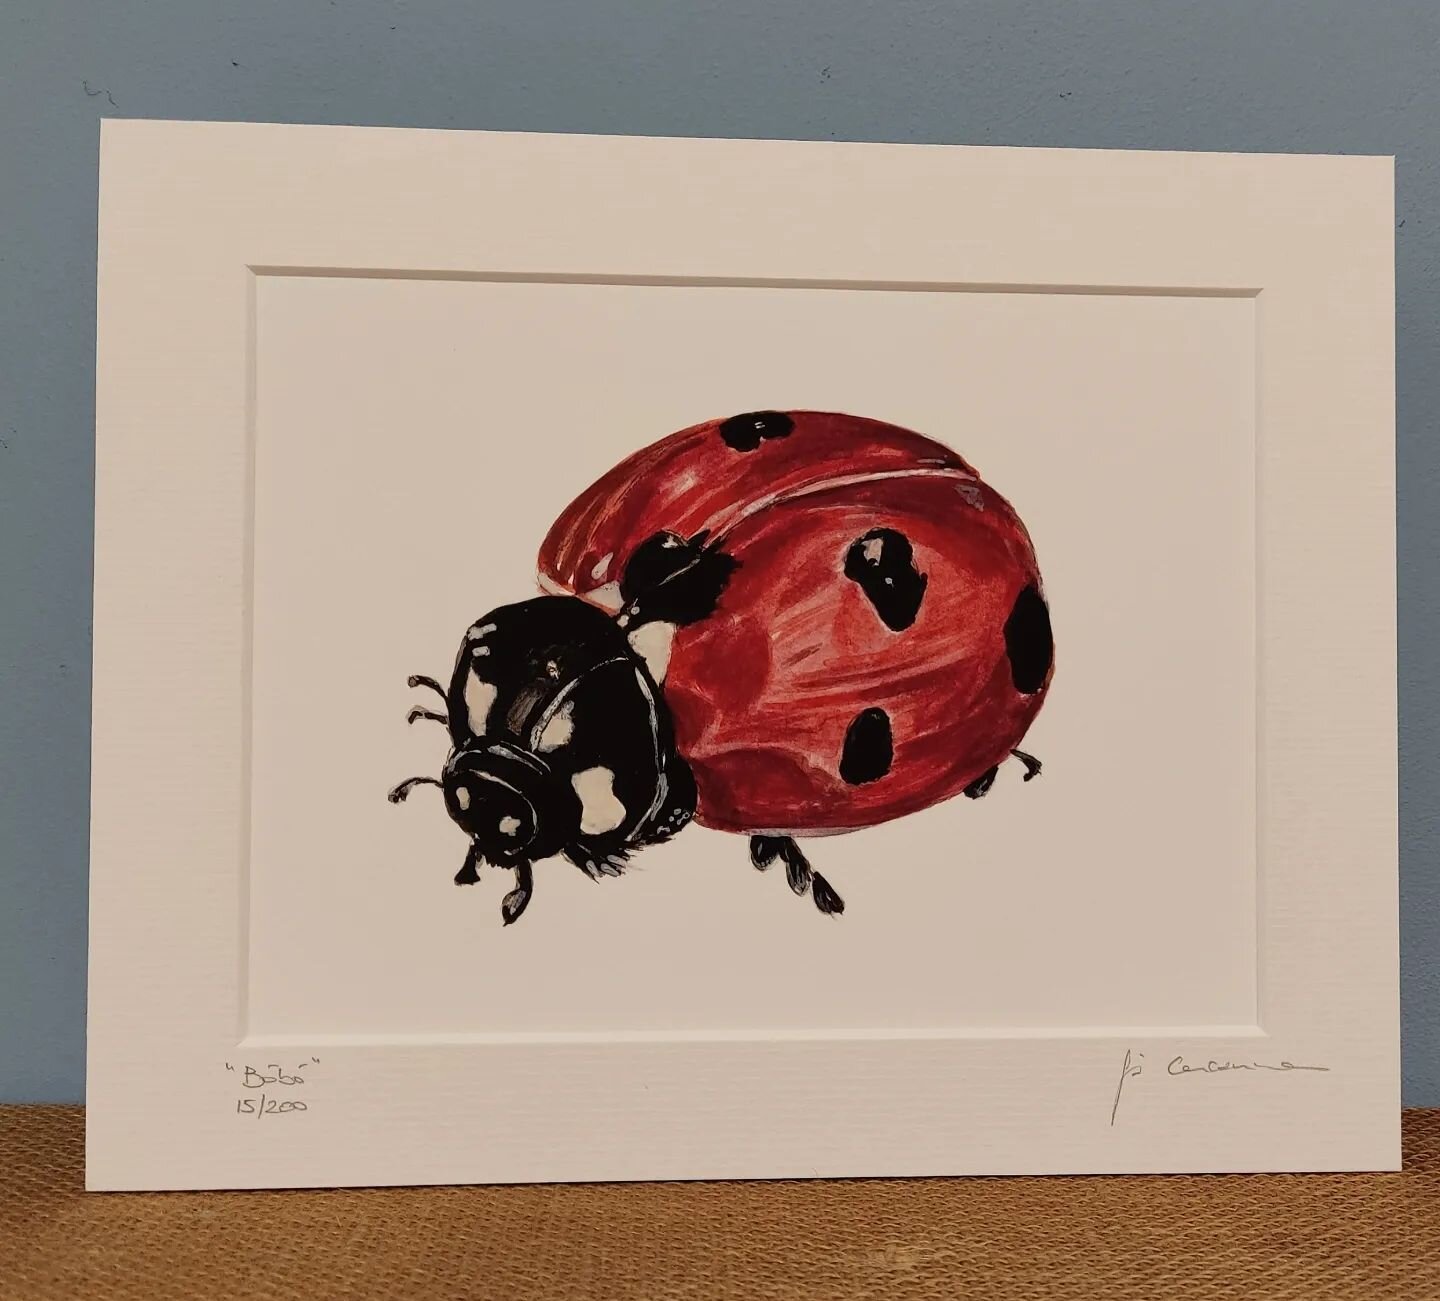 Look at this beauty by @fiona.concannonartist. Picked it up in @airmidireland this morning on my way back from The Cliffs. Couldn't resist as I put a ladybird on every one of my pieces how could I not get it. Can't wait to frame it 🐞